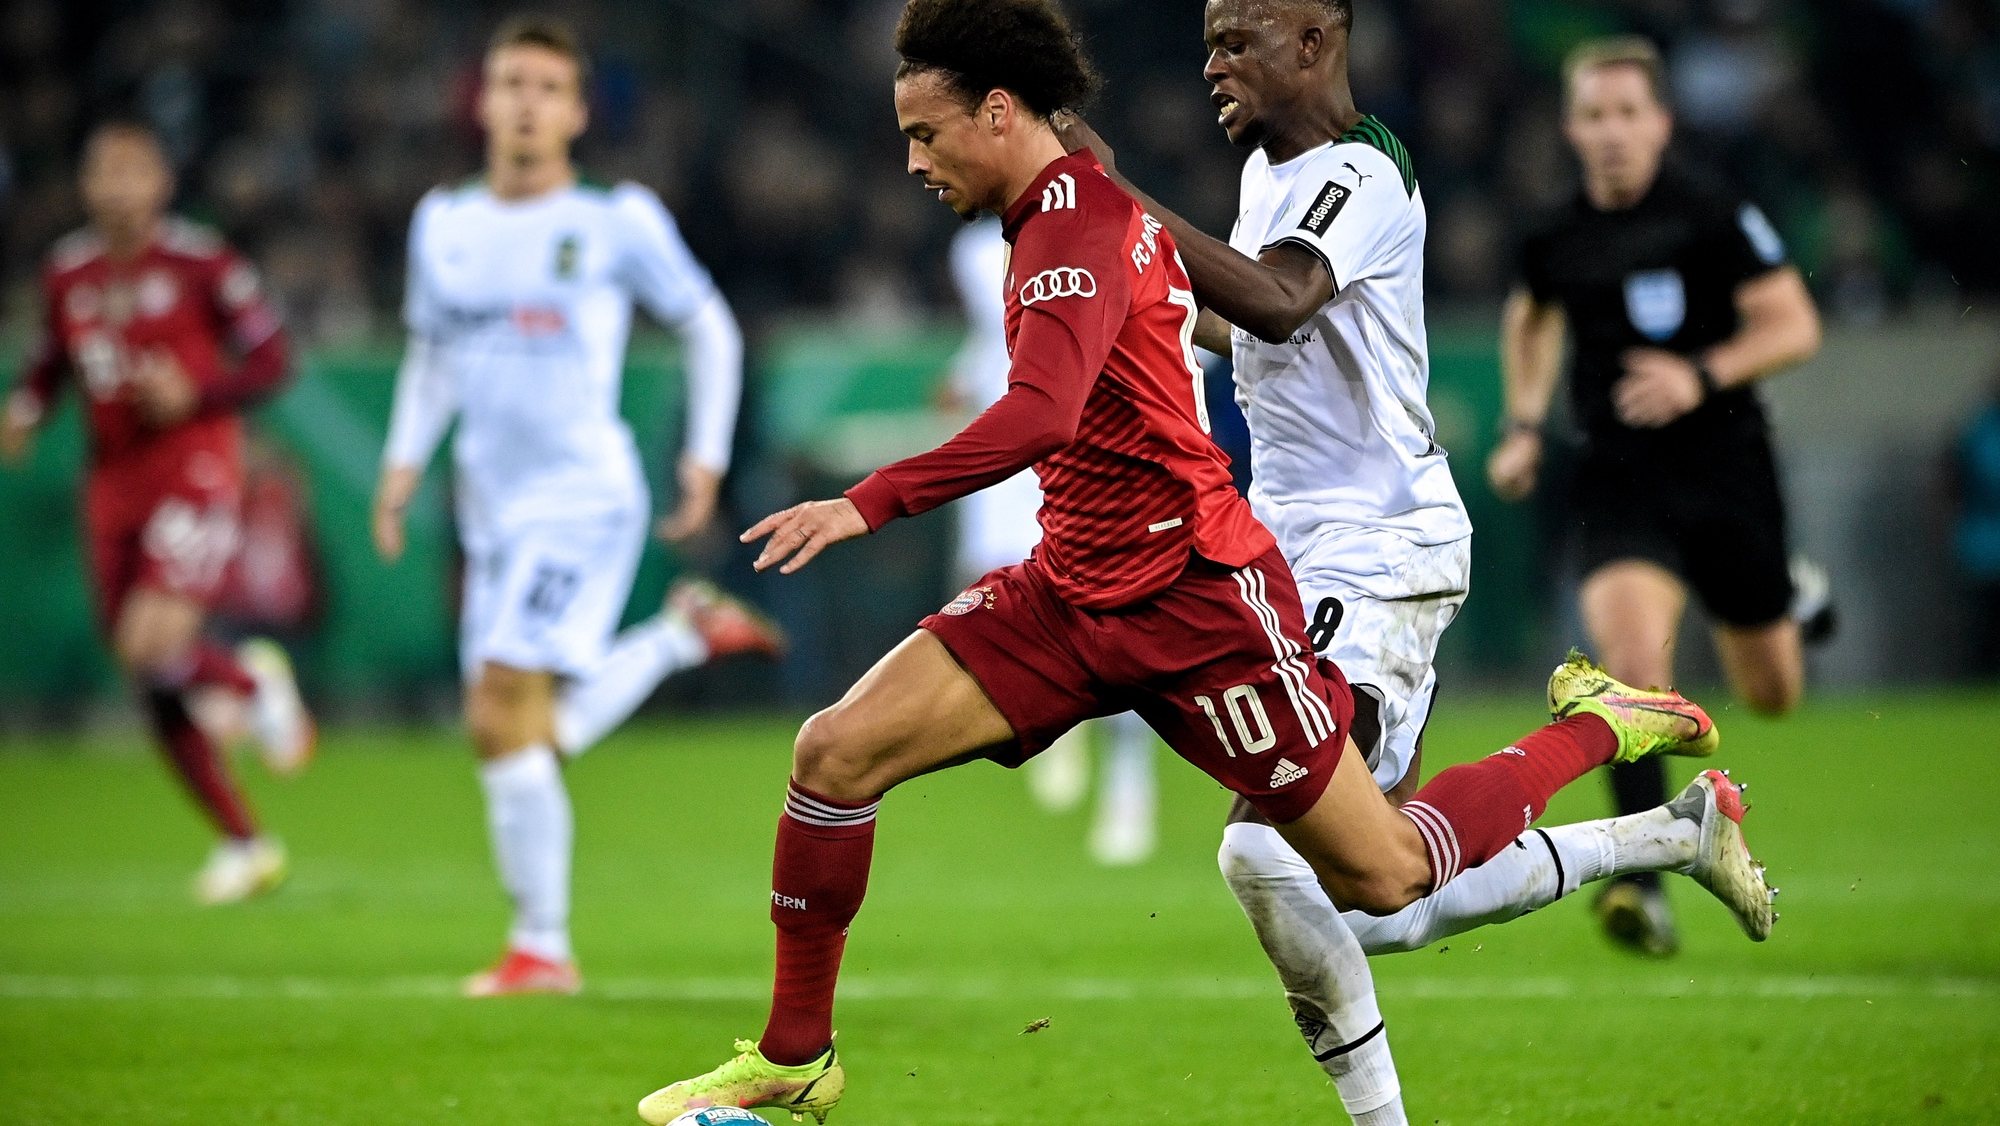 epa09549820 Bayern&#039;s Leroy Sane (L) in action against Moenchengladbach&#039;s Denis Zakaria (R) during the German DFB Cup second round soccer match between Borussia Moenchengladbach and FC Bayern Muenchen at Borussia-Park in Moenchengladbach, Germany, 27 October 2021.  EPA/SASCHA STEINBACH CONDITIONS - ATTENTION: The DFB regulations prohibit any use of photographs as image sequences and/or quasi-video.